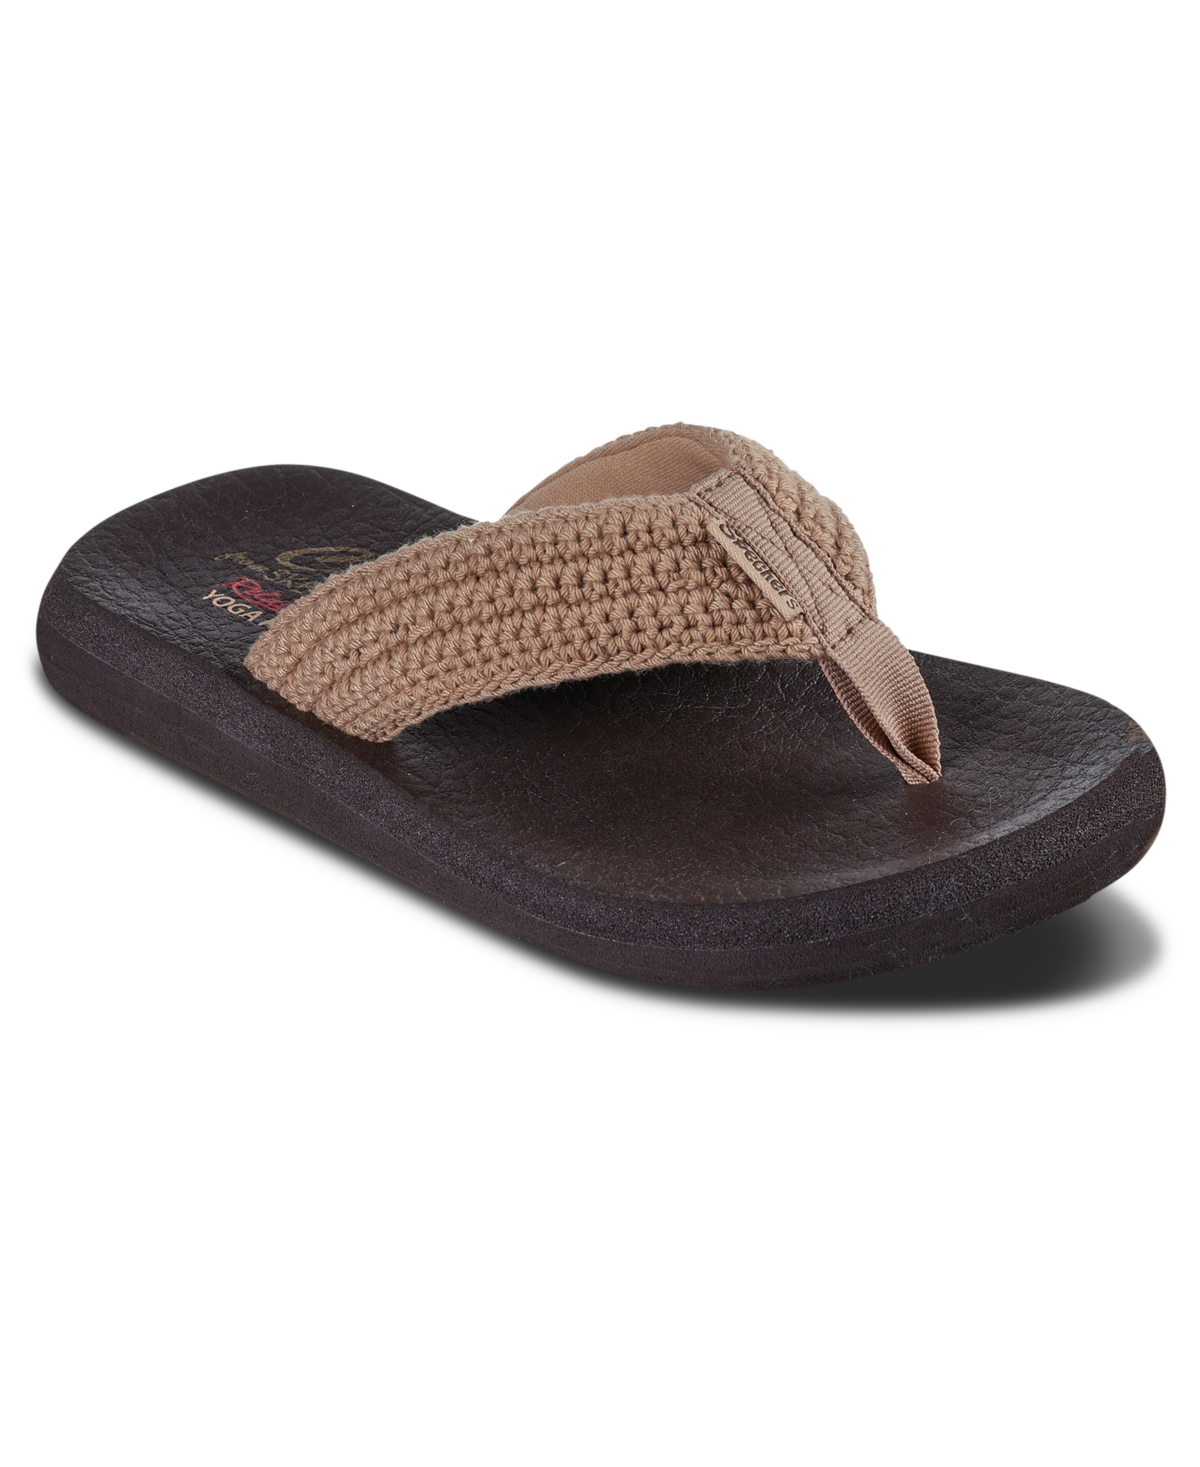 Women's Cali Asana - Valley Chic Flip-Flop Thong Sandals from Finish Line - Mocha